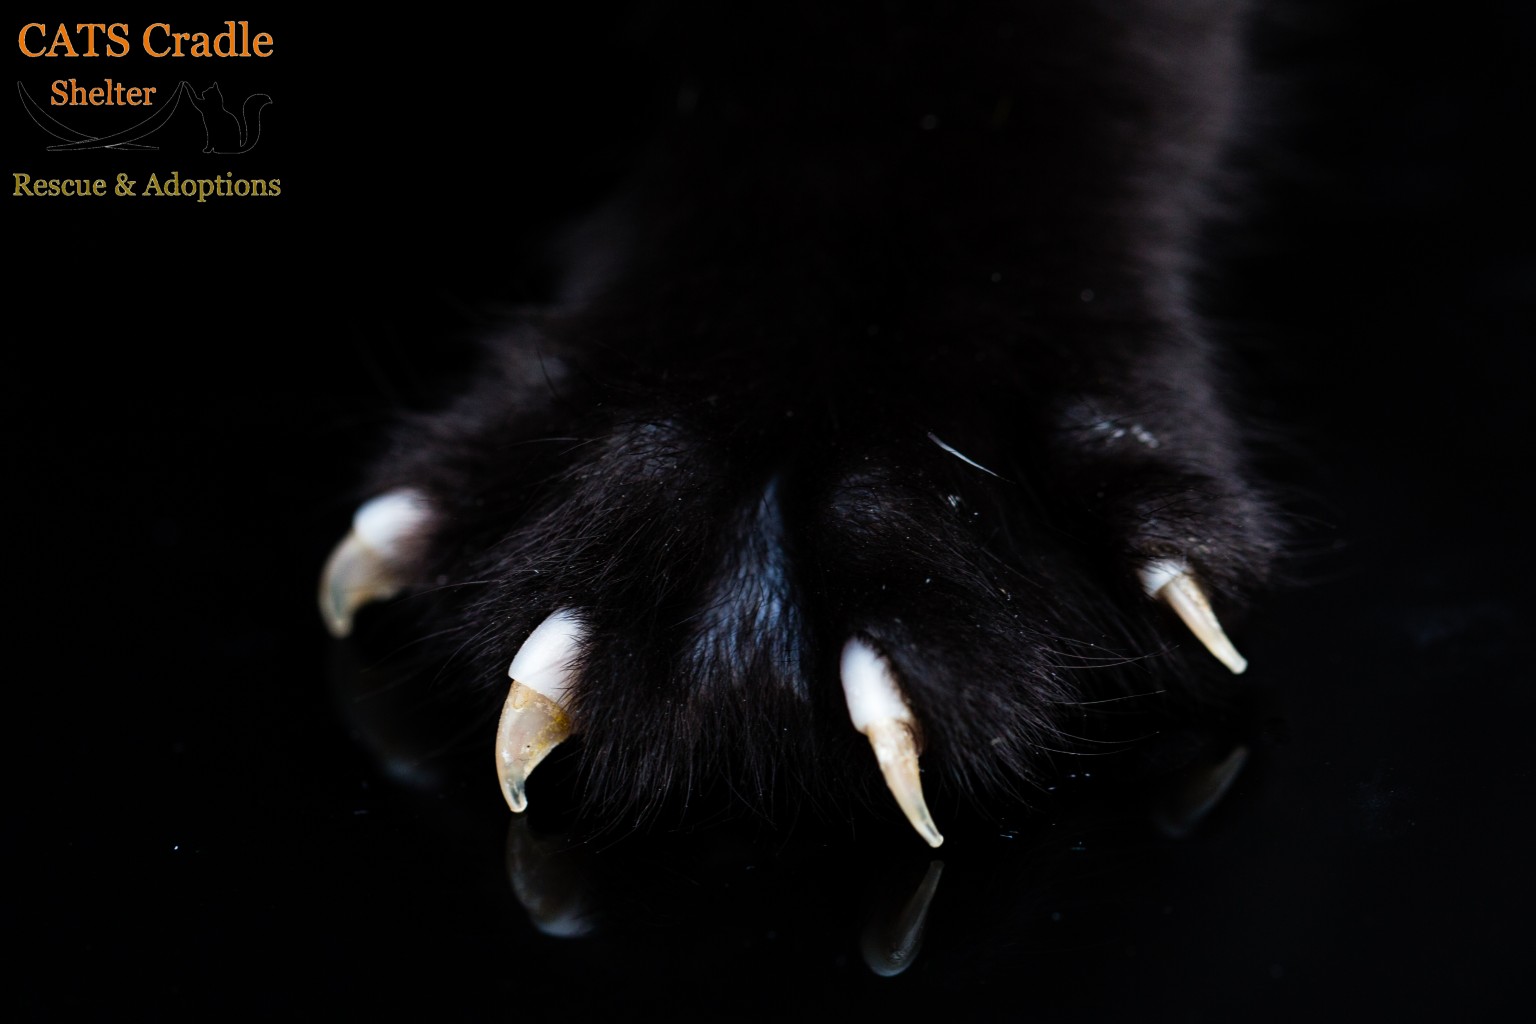 Please don't declaw